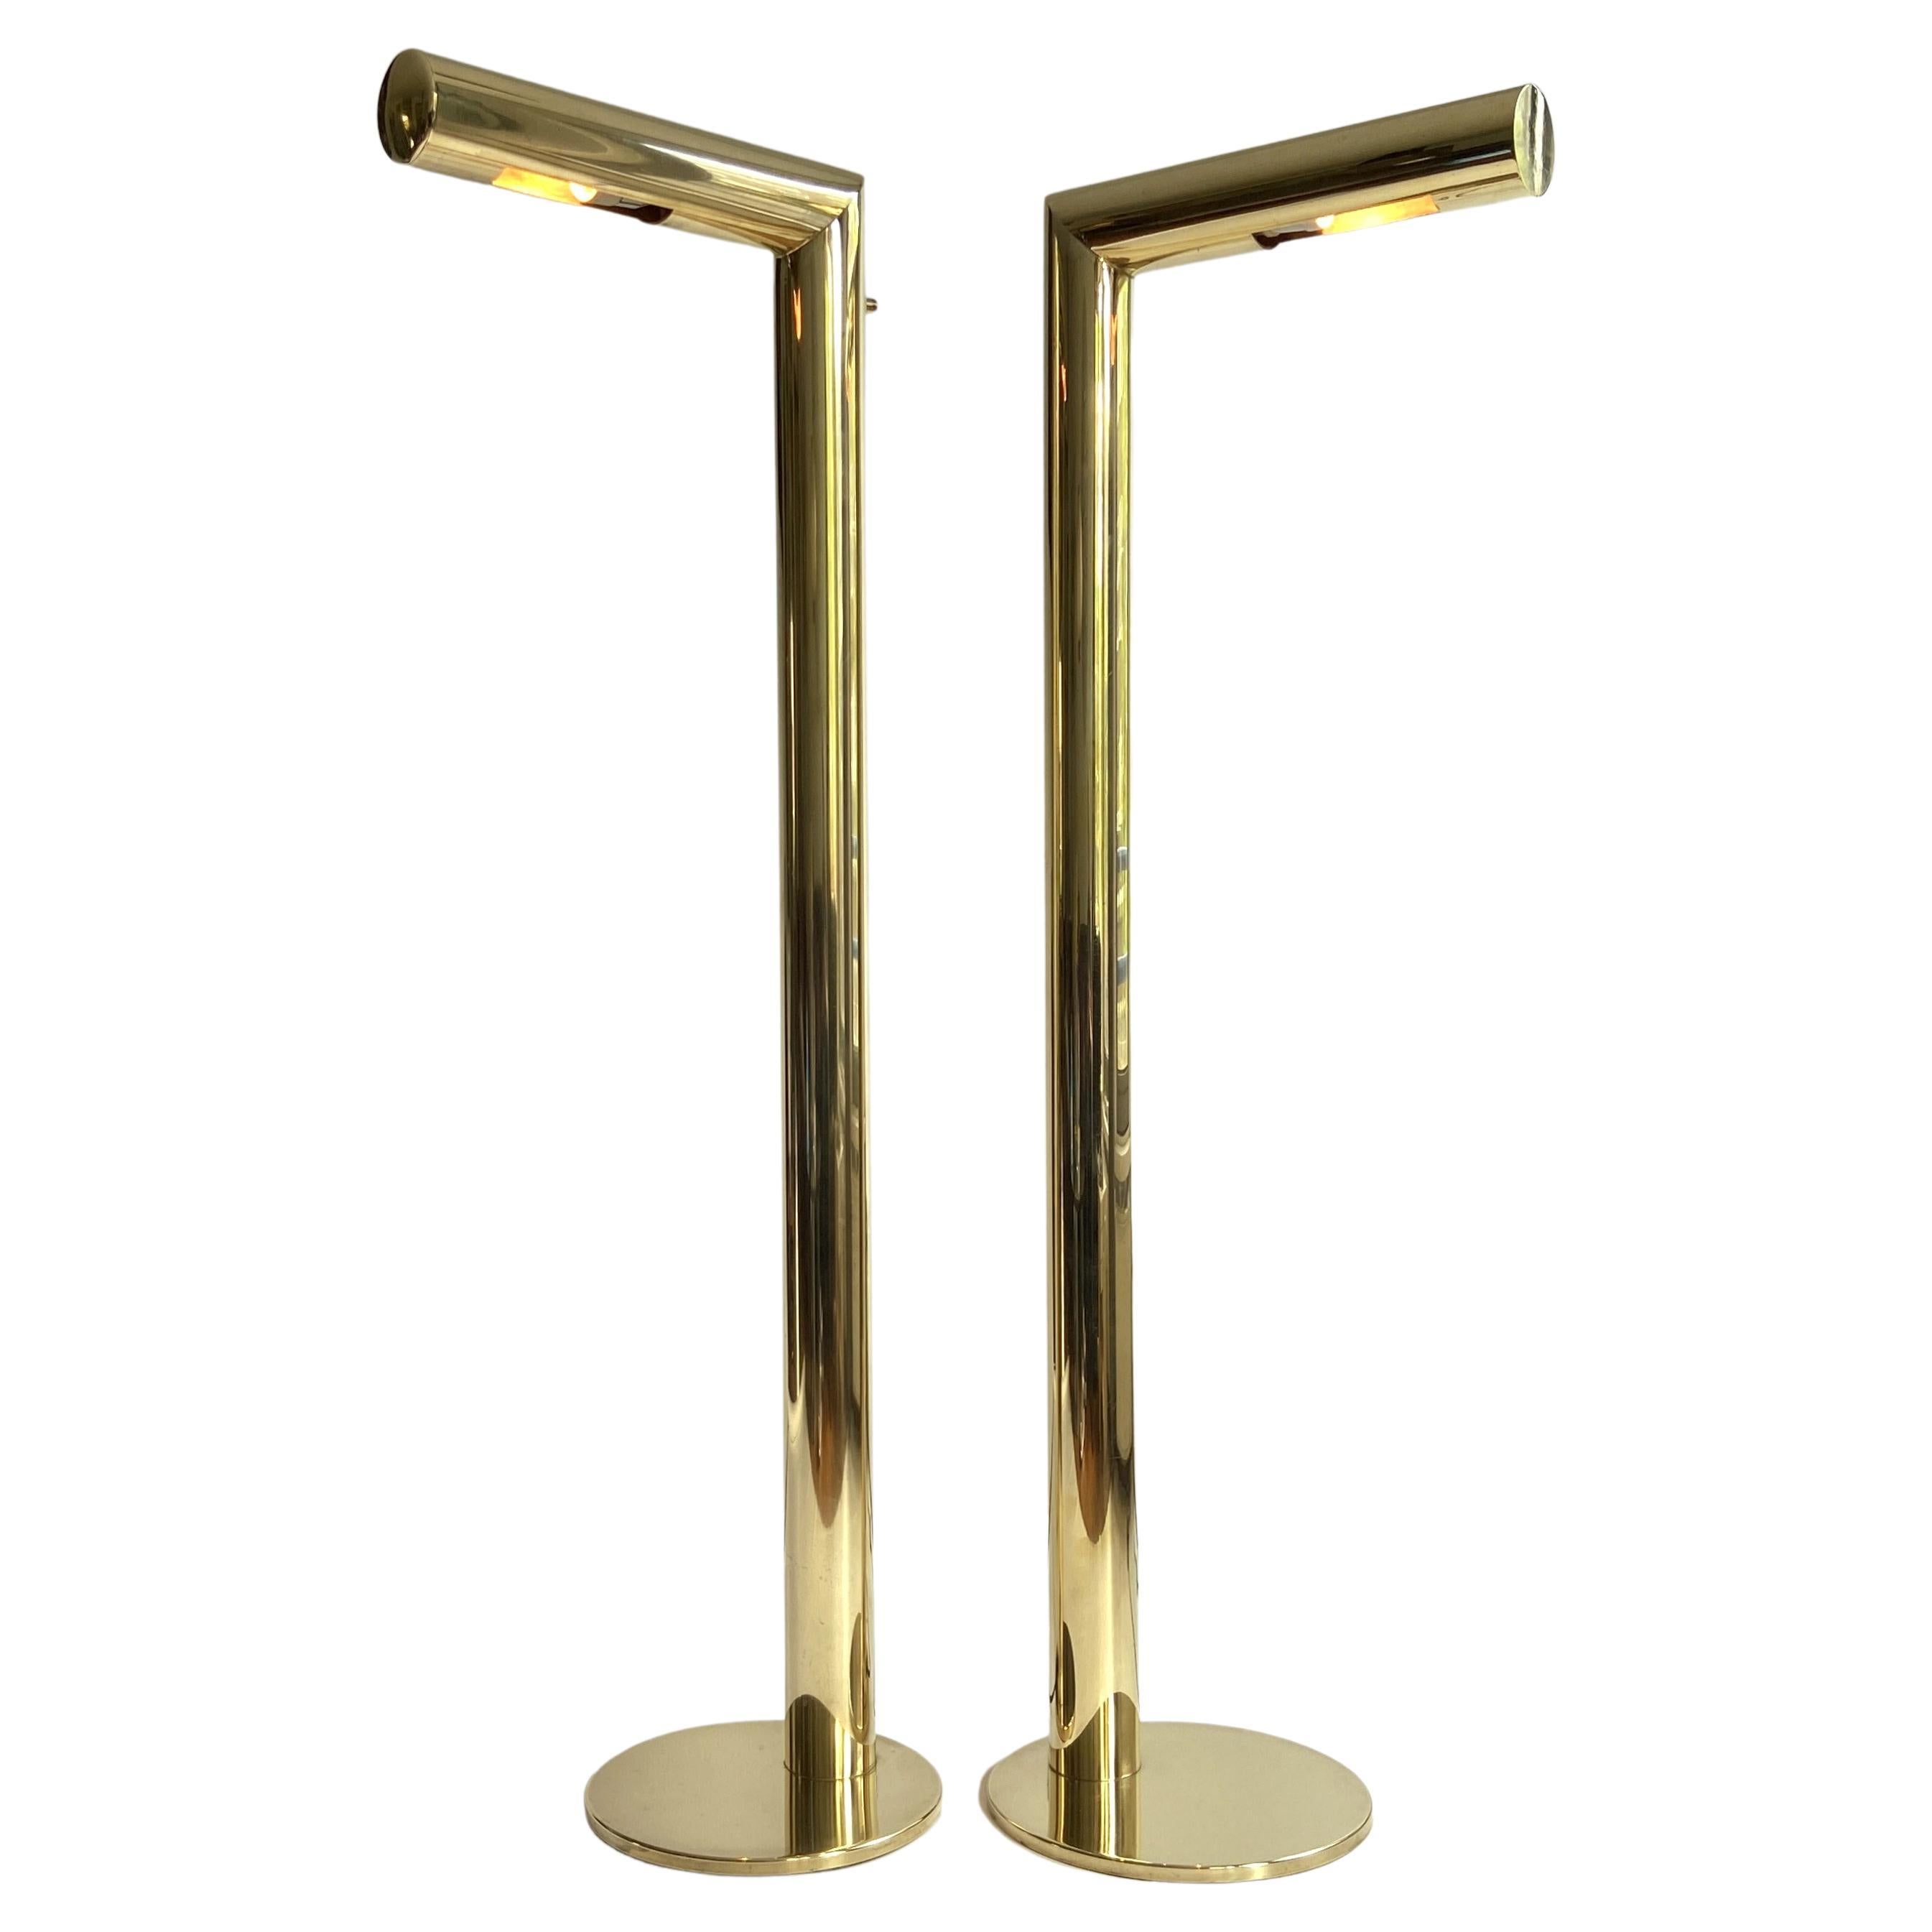 Two minimalist brass floor lamps designed by Jonas Hilde for Hovik Lys AS, Norway, circa 1980. They create downwards lighting in a fixed position, ideal for reading and atmospheric light
The lamps are a remarkable example of Norwegian post modernist